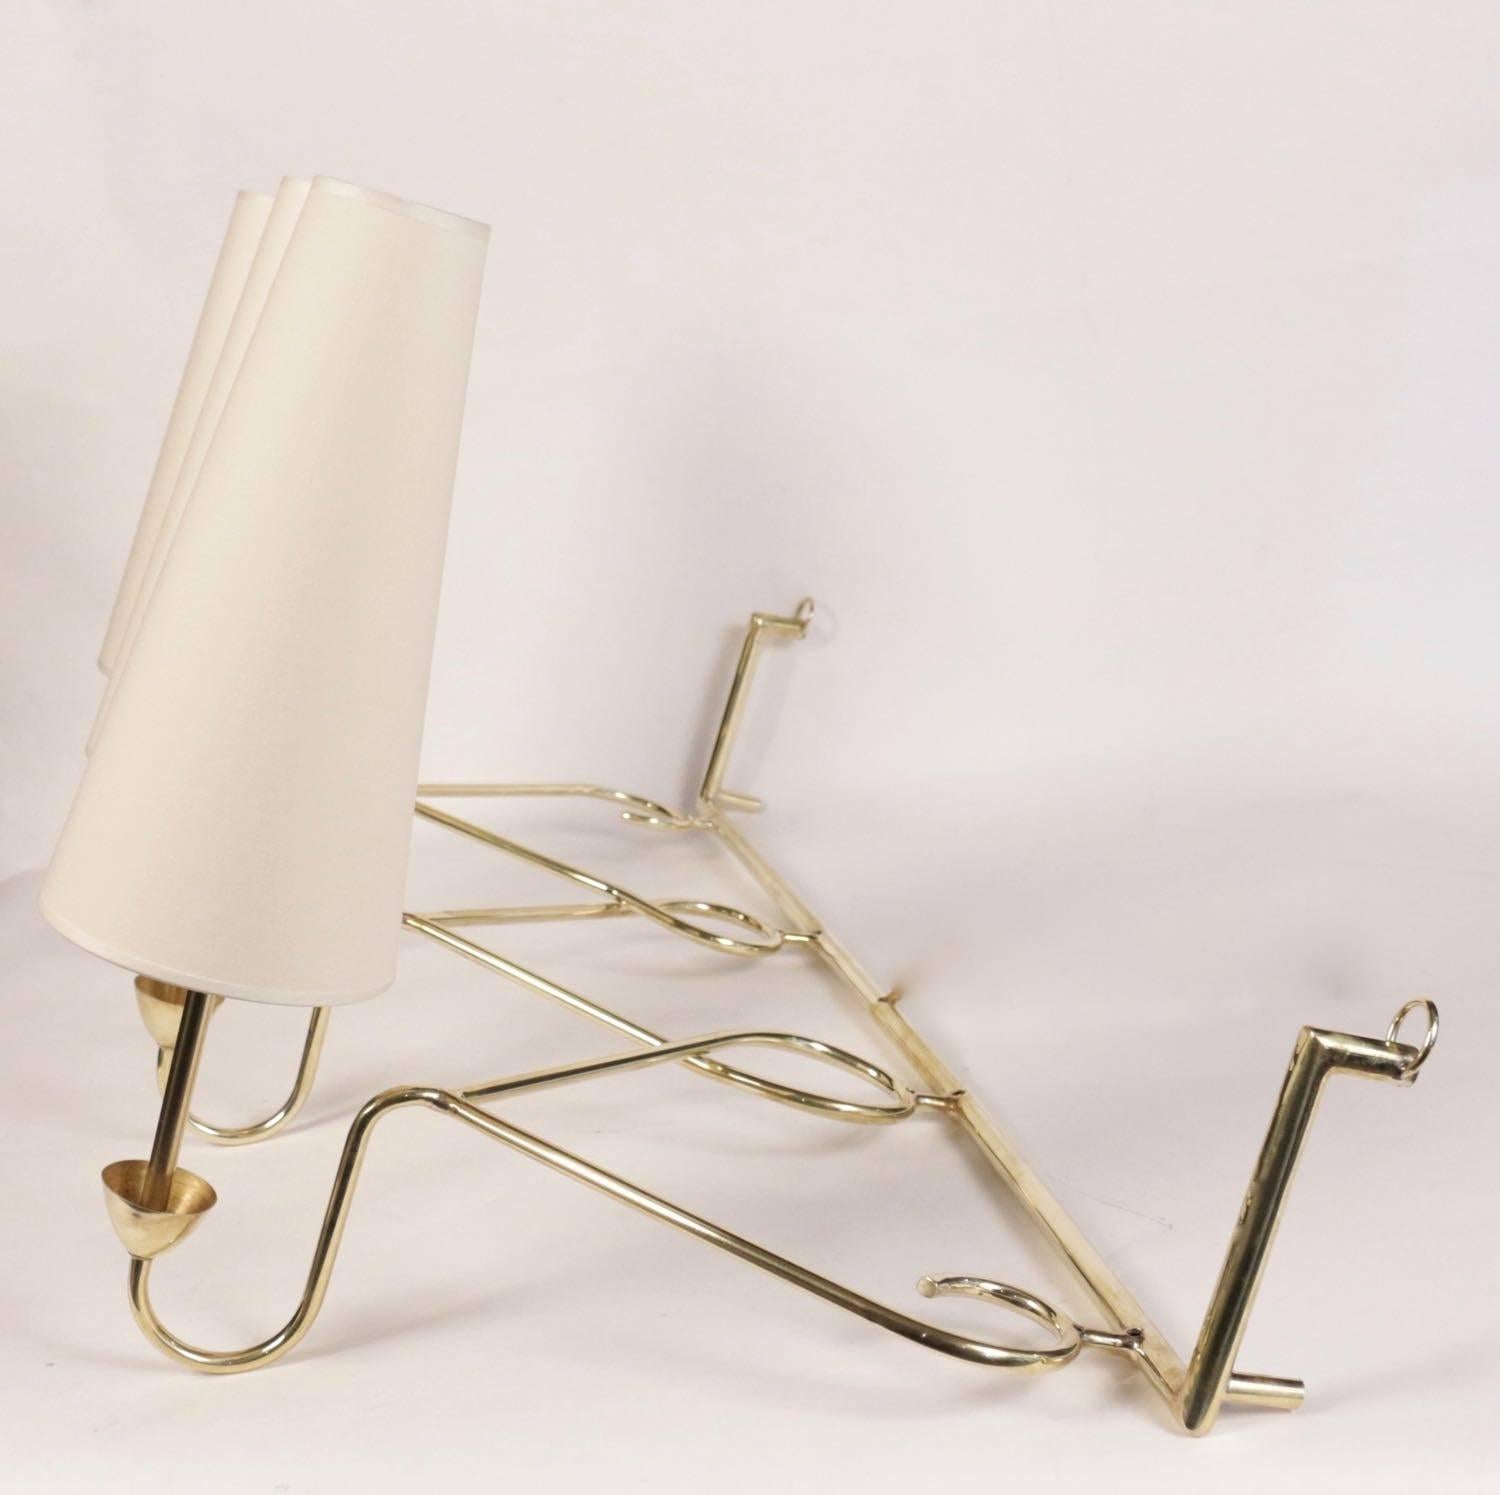 Large 1950s sconce House Stilnovo Style.

The wall bracket consists of a long horizontal rod terminated on each side by two small vertical rods with a loop at each end to allow hanging on the wall.
A long horizontal rod forms beautiful intertwined